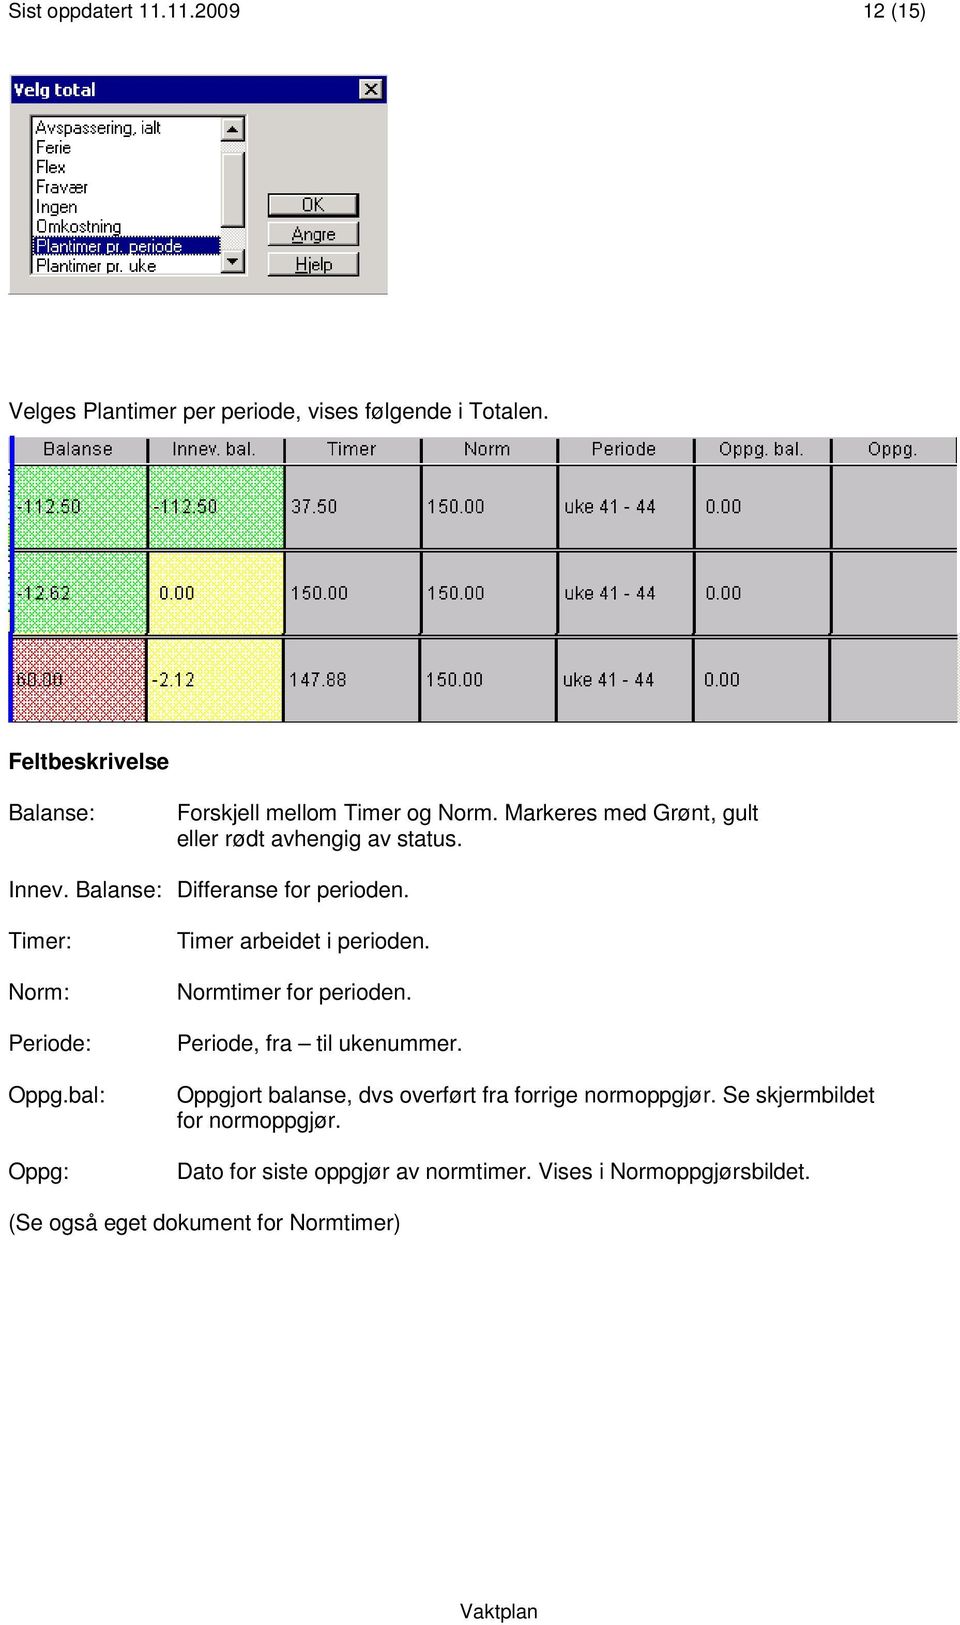 Balanse: Differanse for perioden. Timer: Norm: Periode: Oppg.bal: Oppg: Timer arbeidet i perioden. Normtimer for perioden.